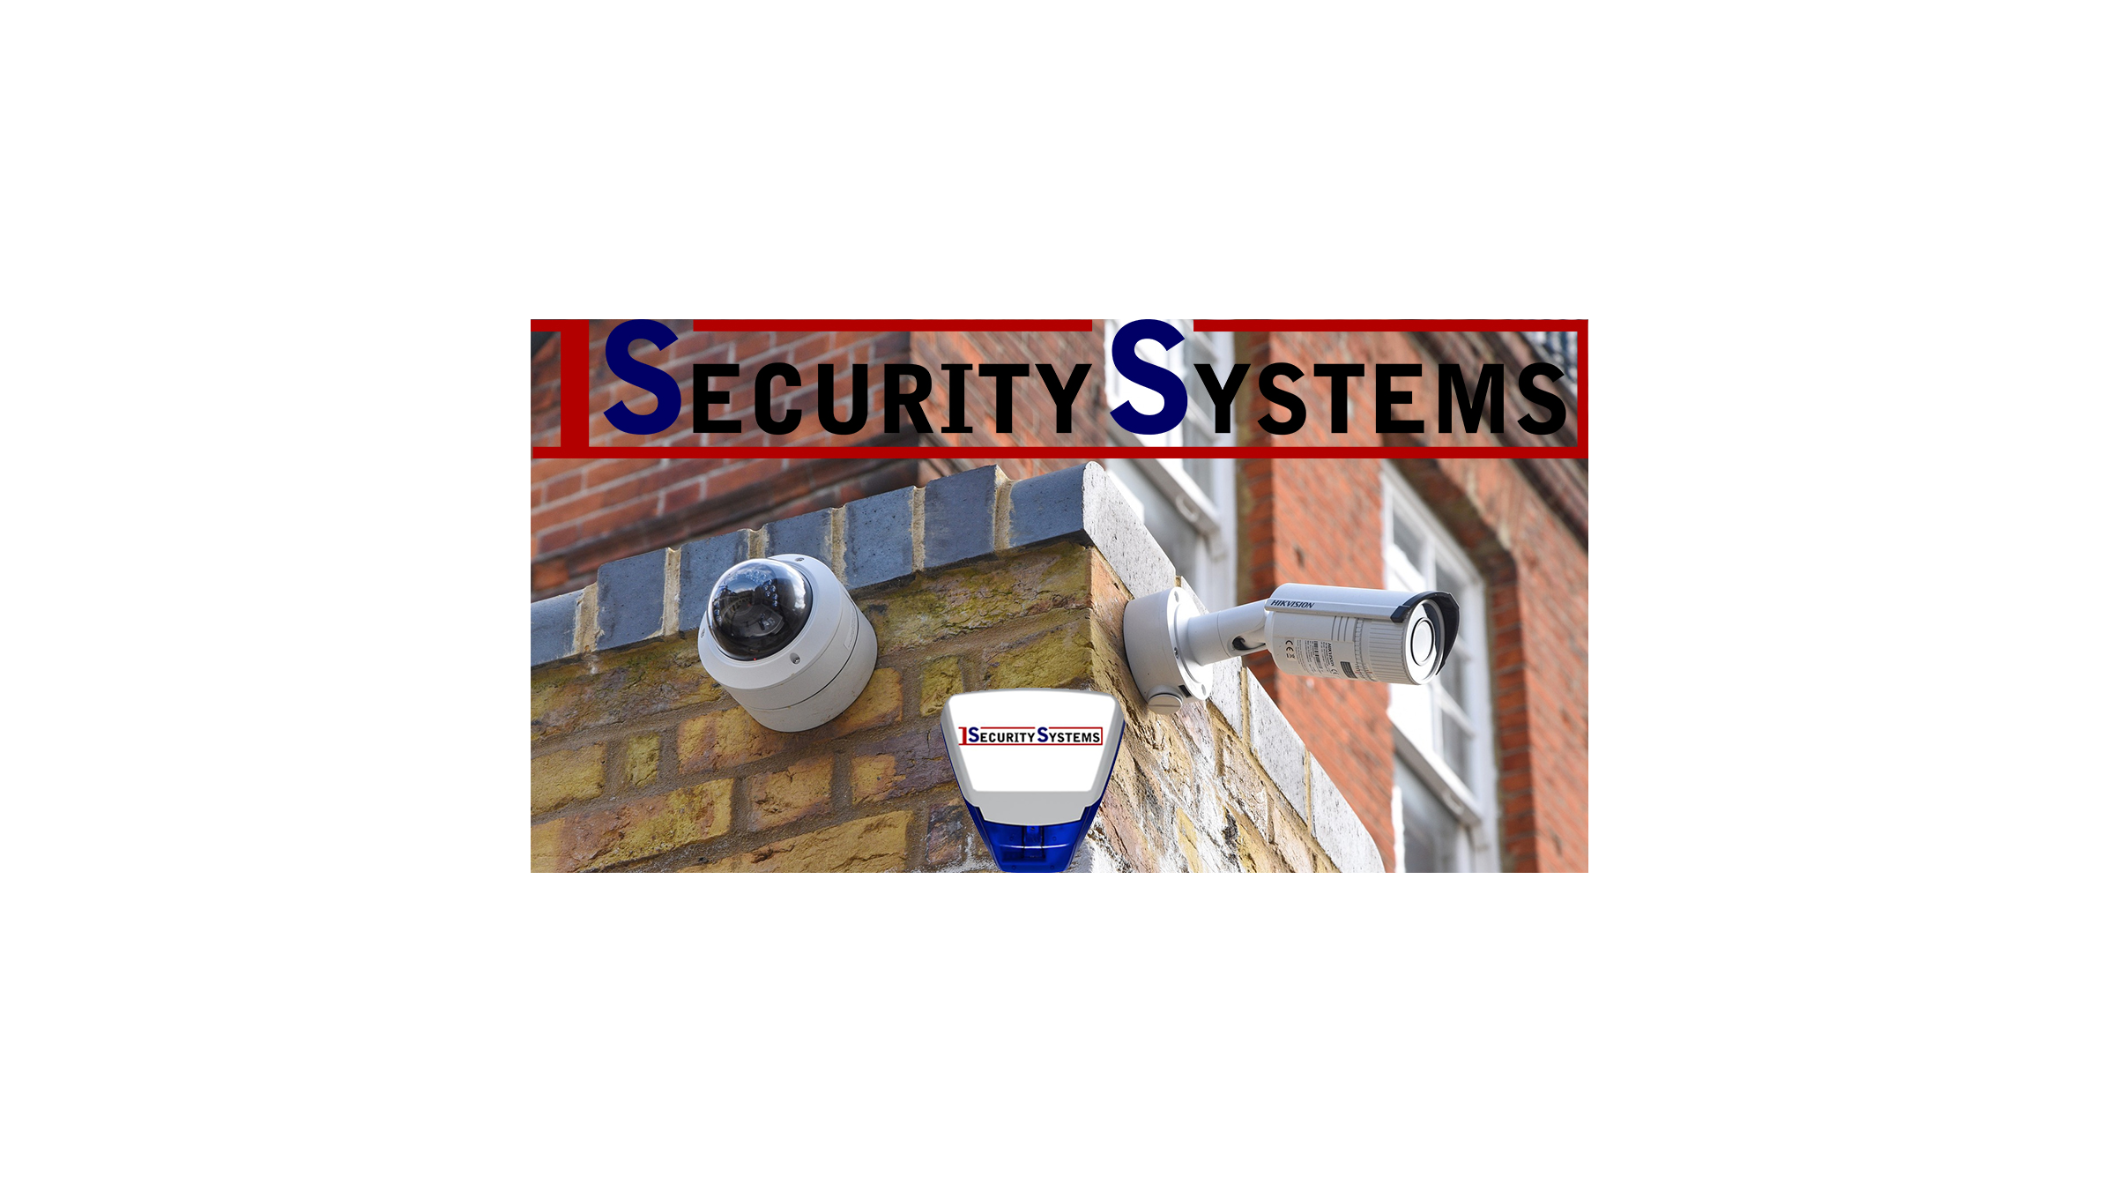 Images 1Security Systems